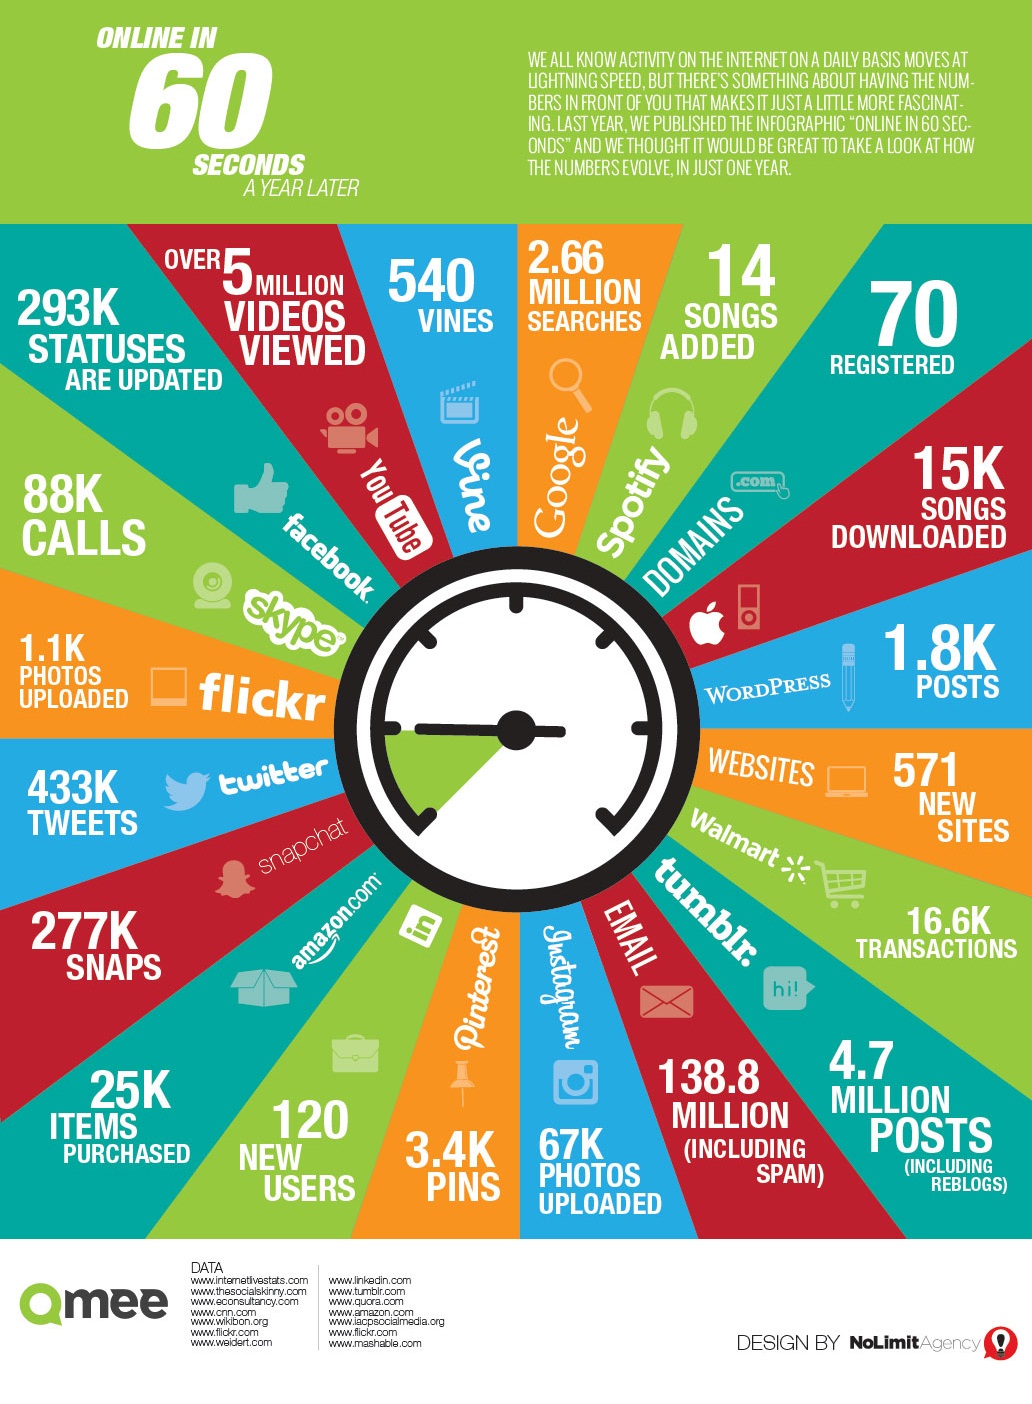 online in 60 seconds infographic a year later